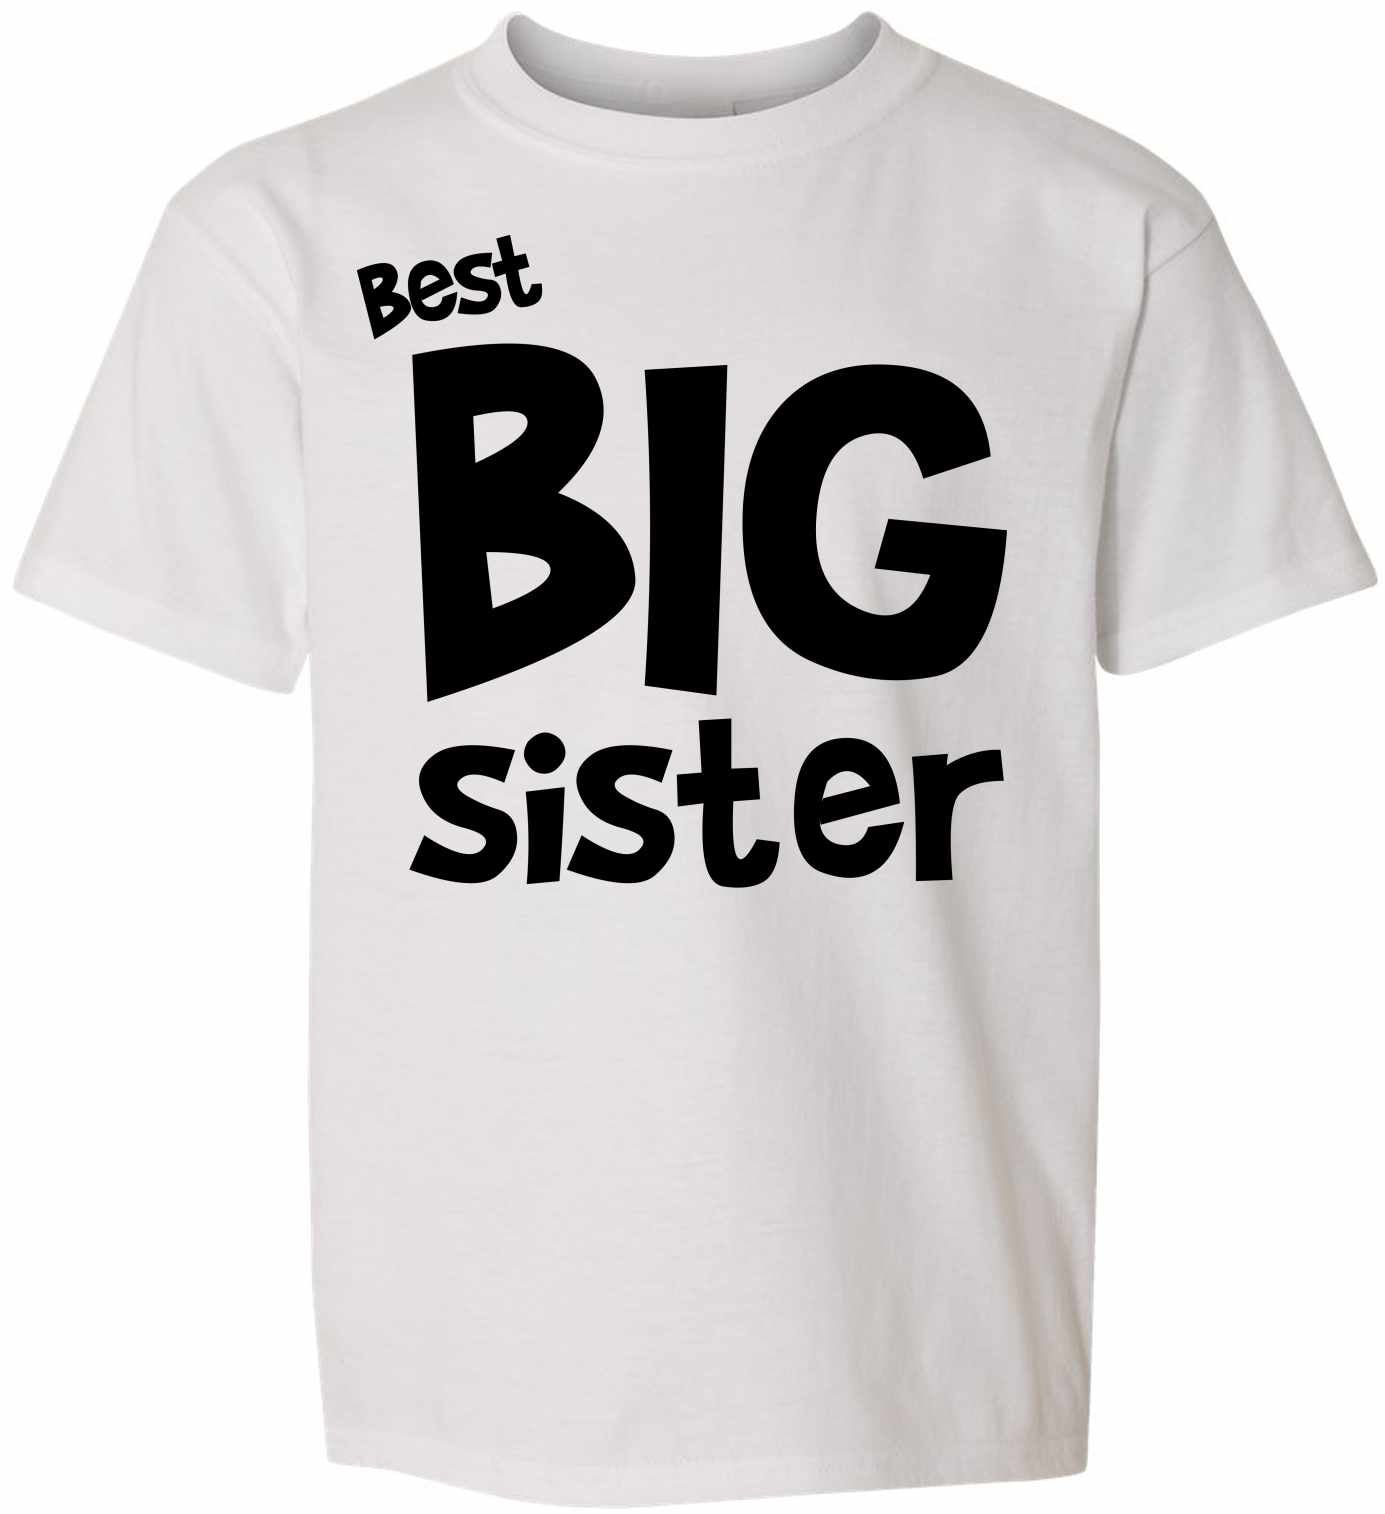 Best Big Sister on Youth T-Shirt (#1139-201)